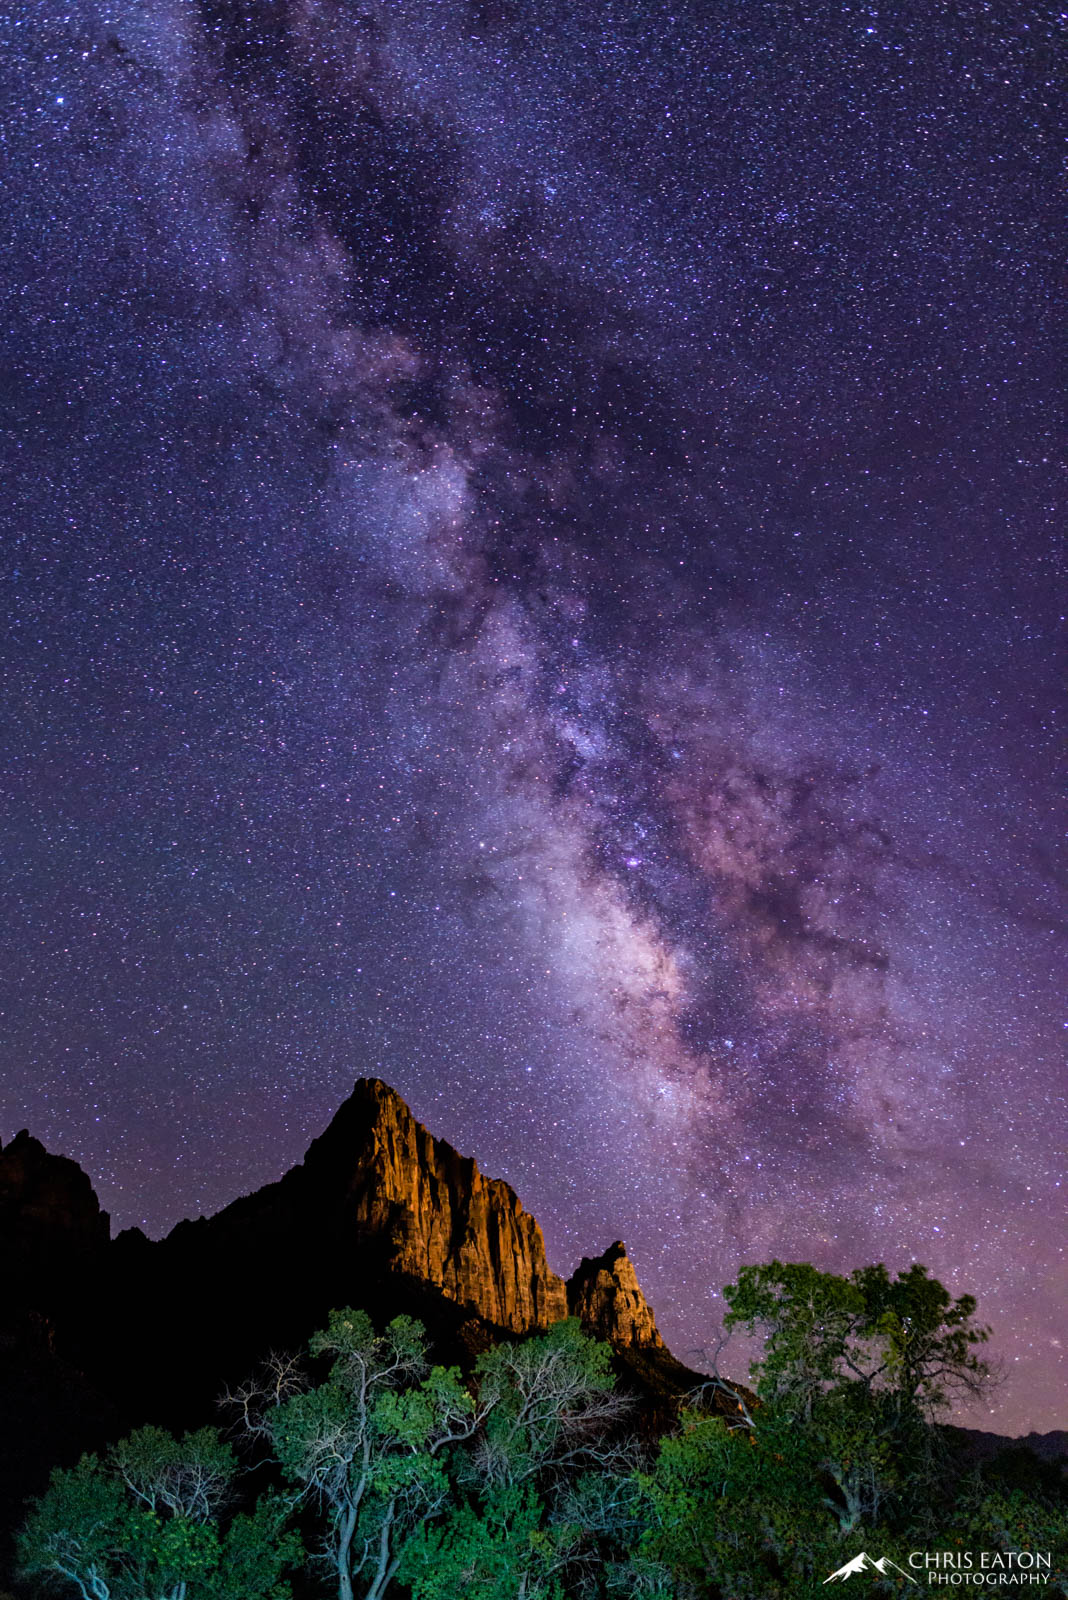 The Milky Way over The Watchman in Zion National Park.